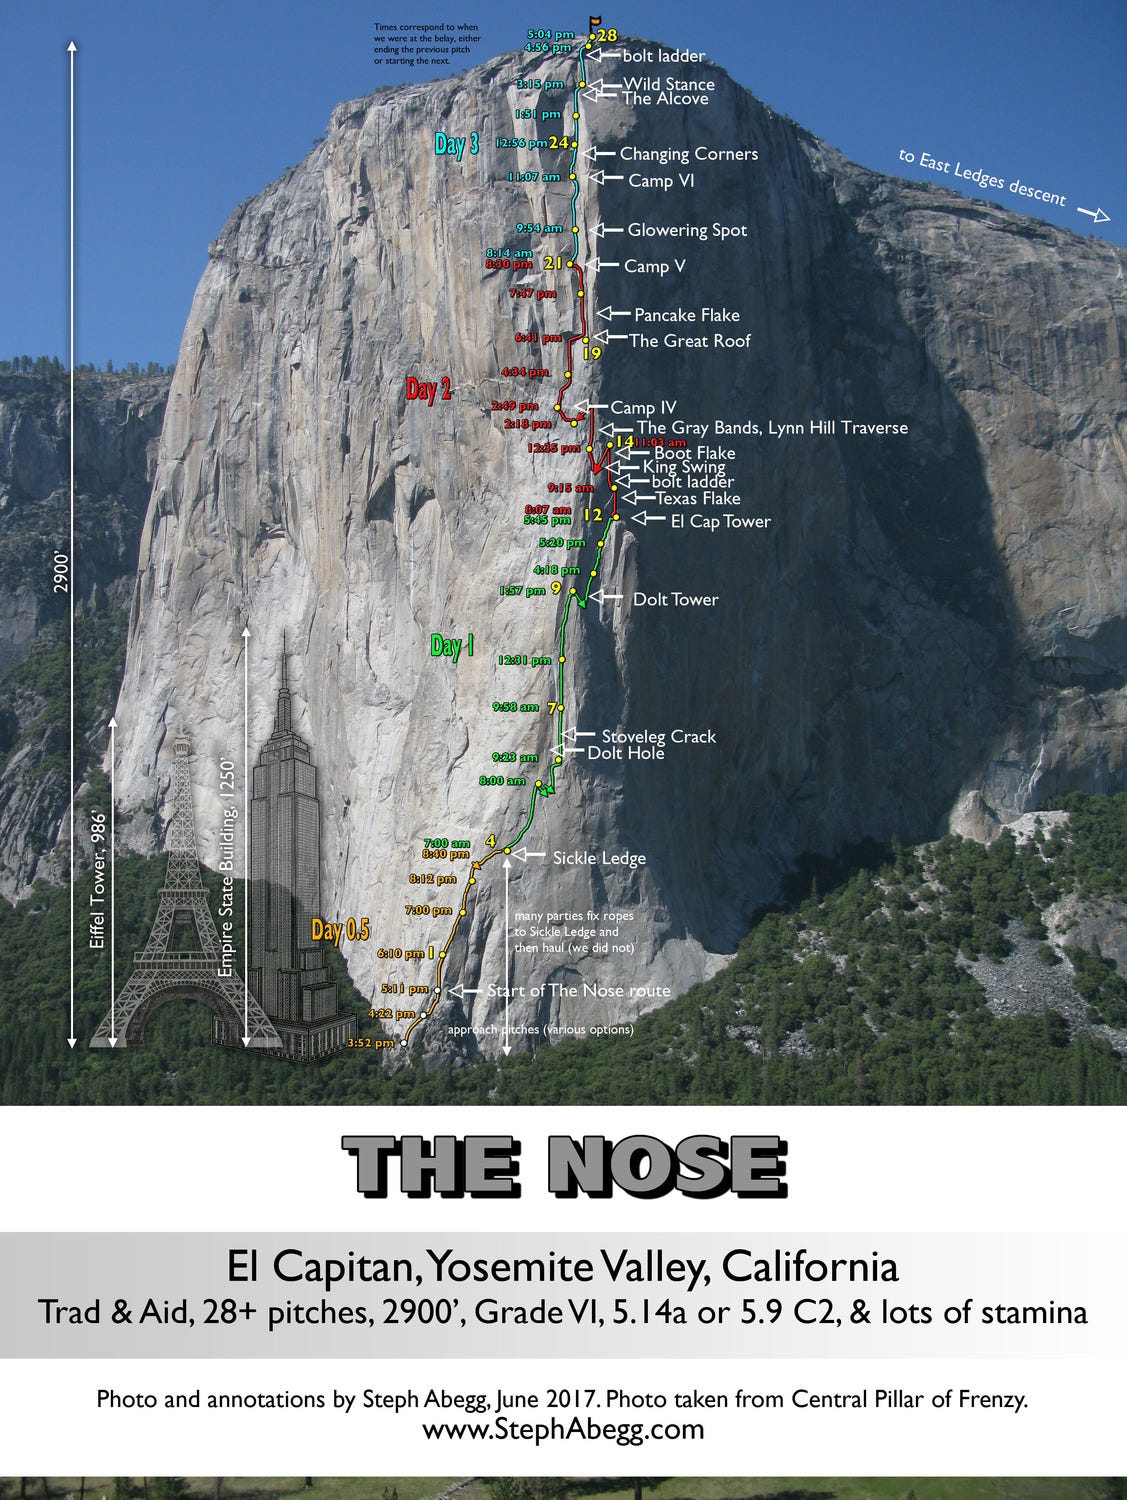 Diagram of The Nose in Yosemite. The Nose is on El Capitan: the biggest granite monolith in the world.